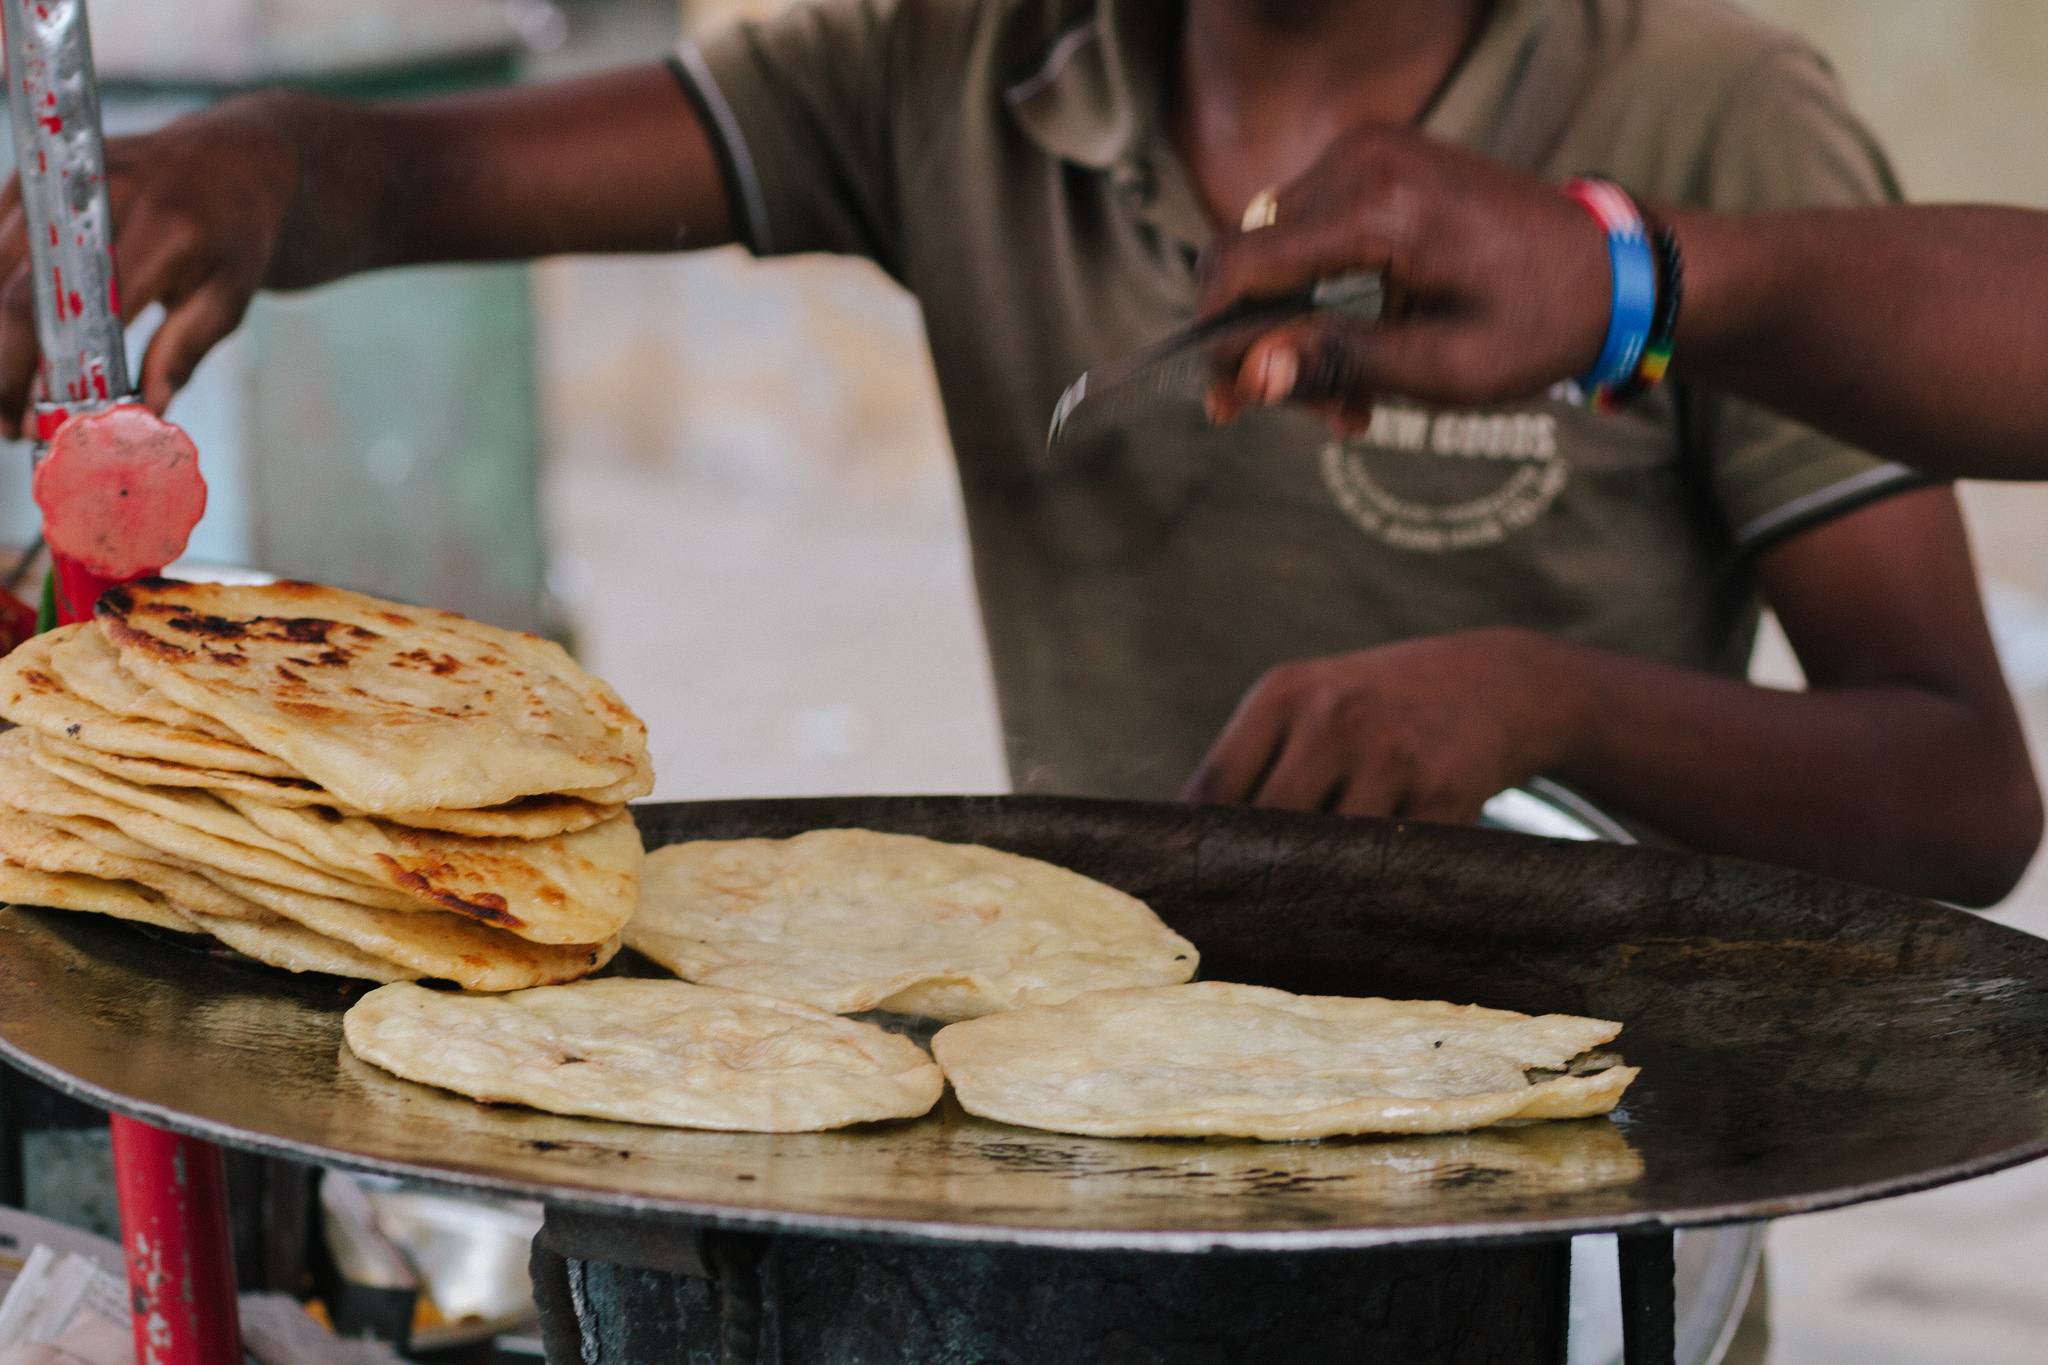 Home-made breakfast is still a staple in India